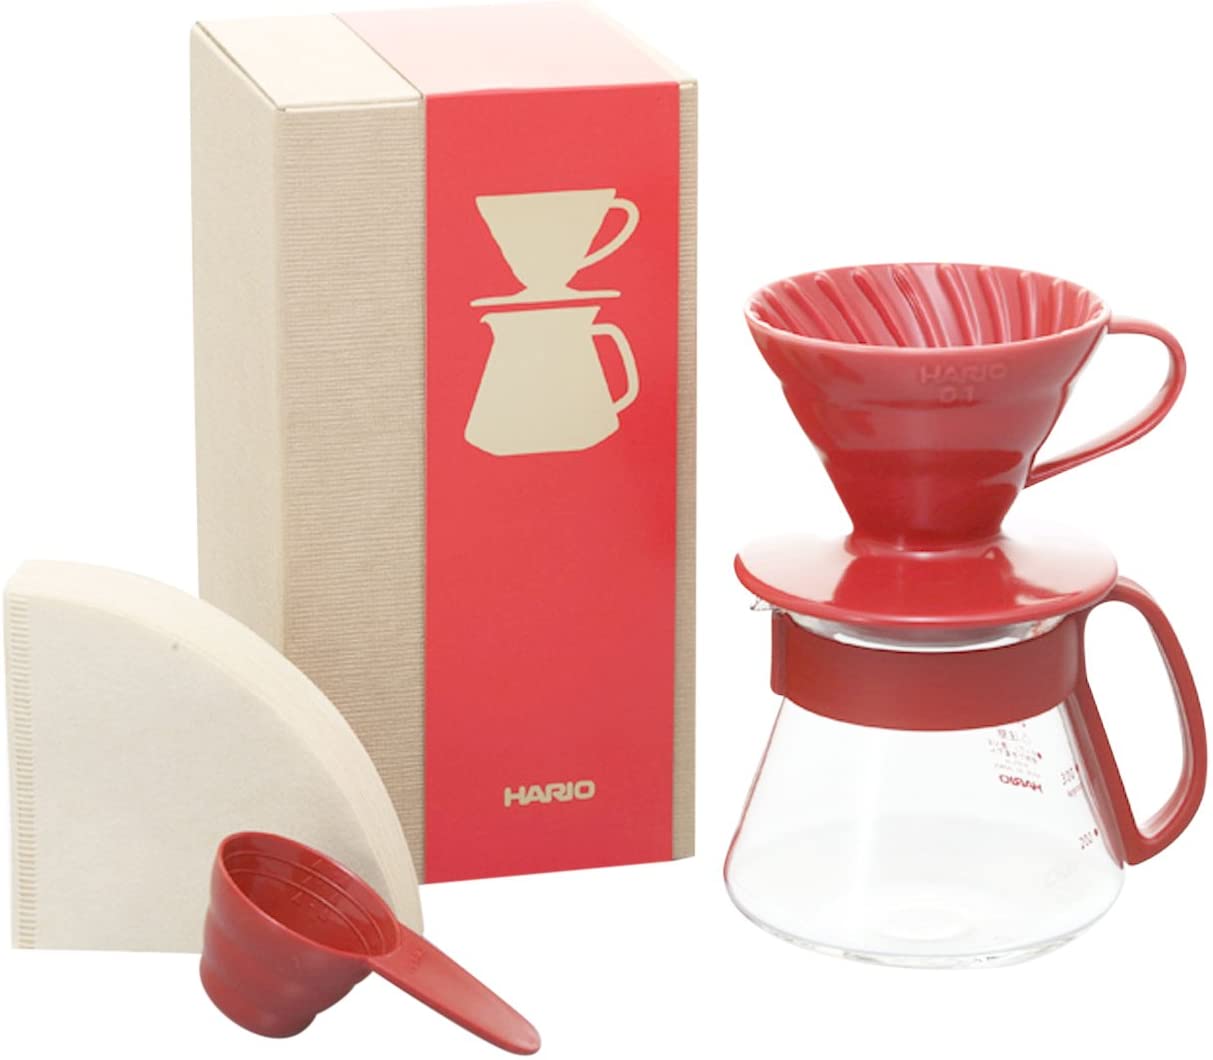 Hario 1-Piece Ceramic Color Coffee Dripper and Pot, Red Size 01